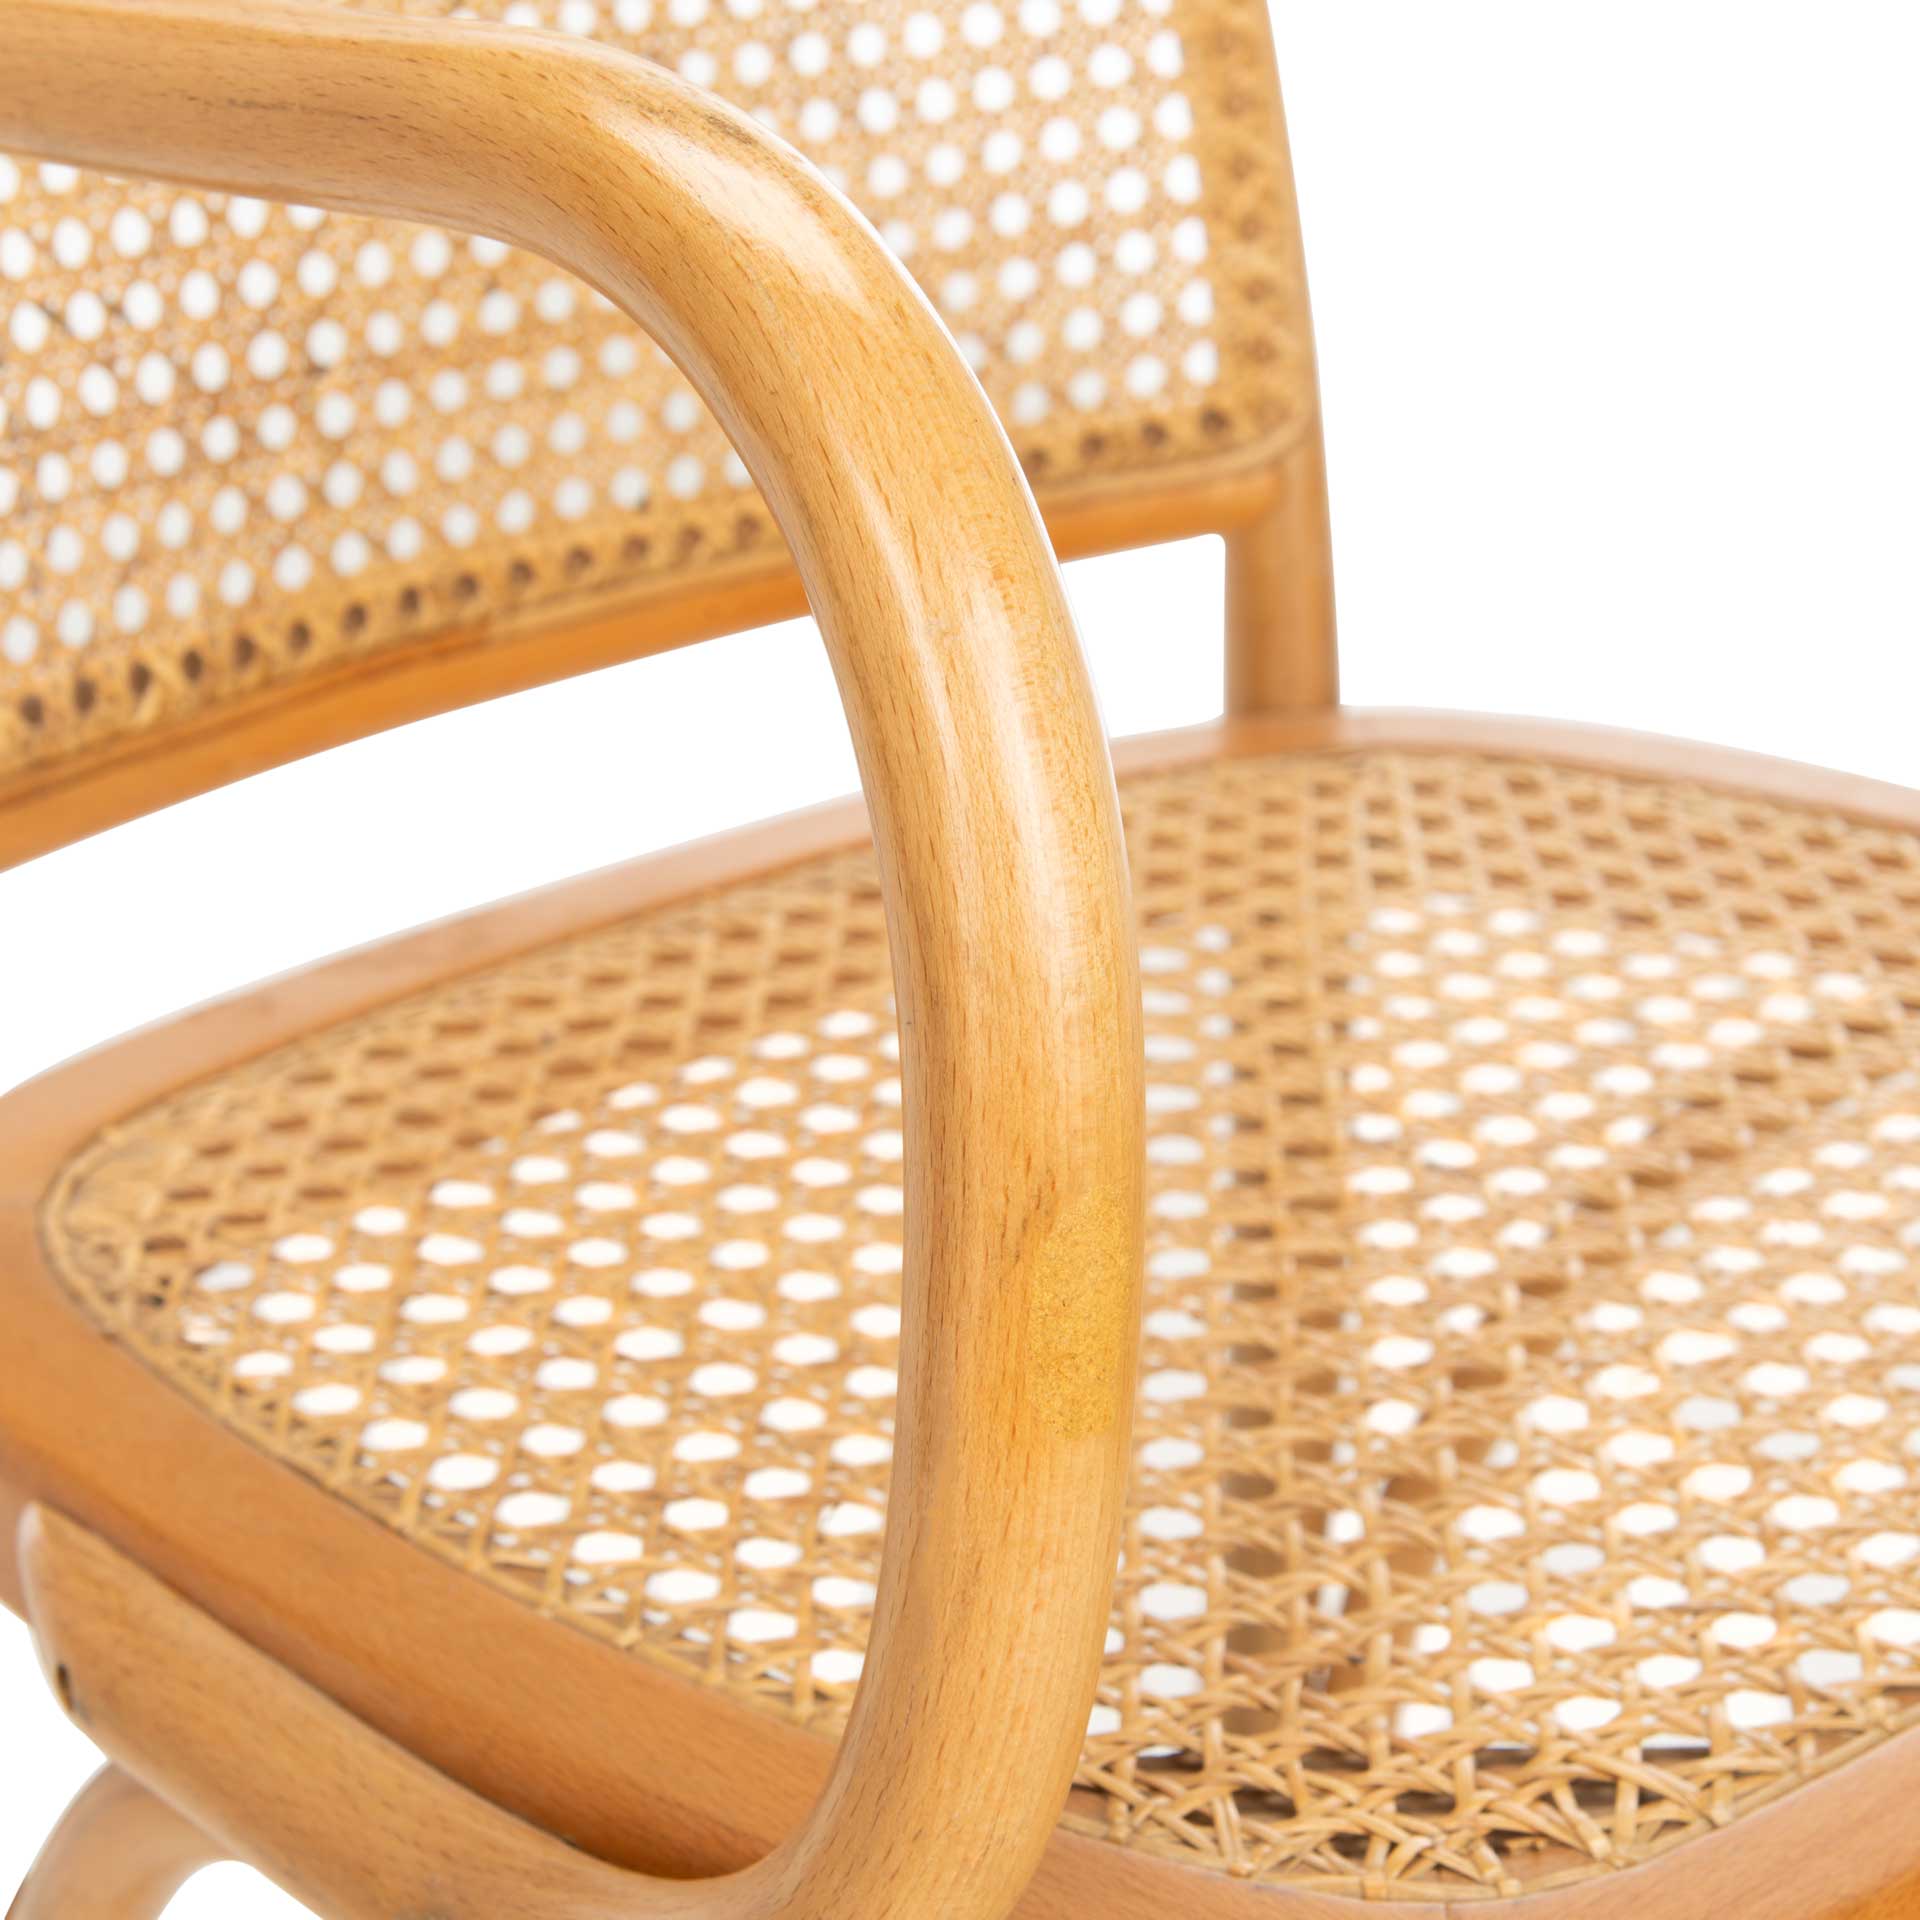 Keanu Cane Dining Chair Natural